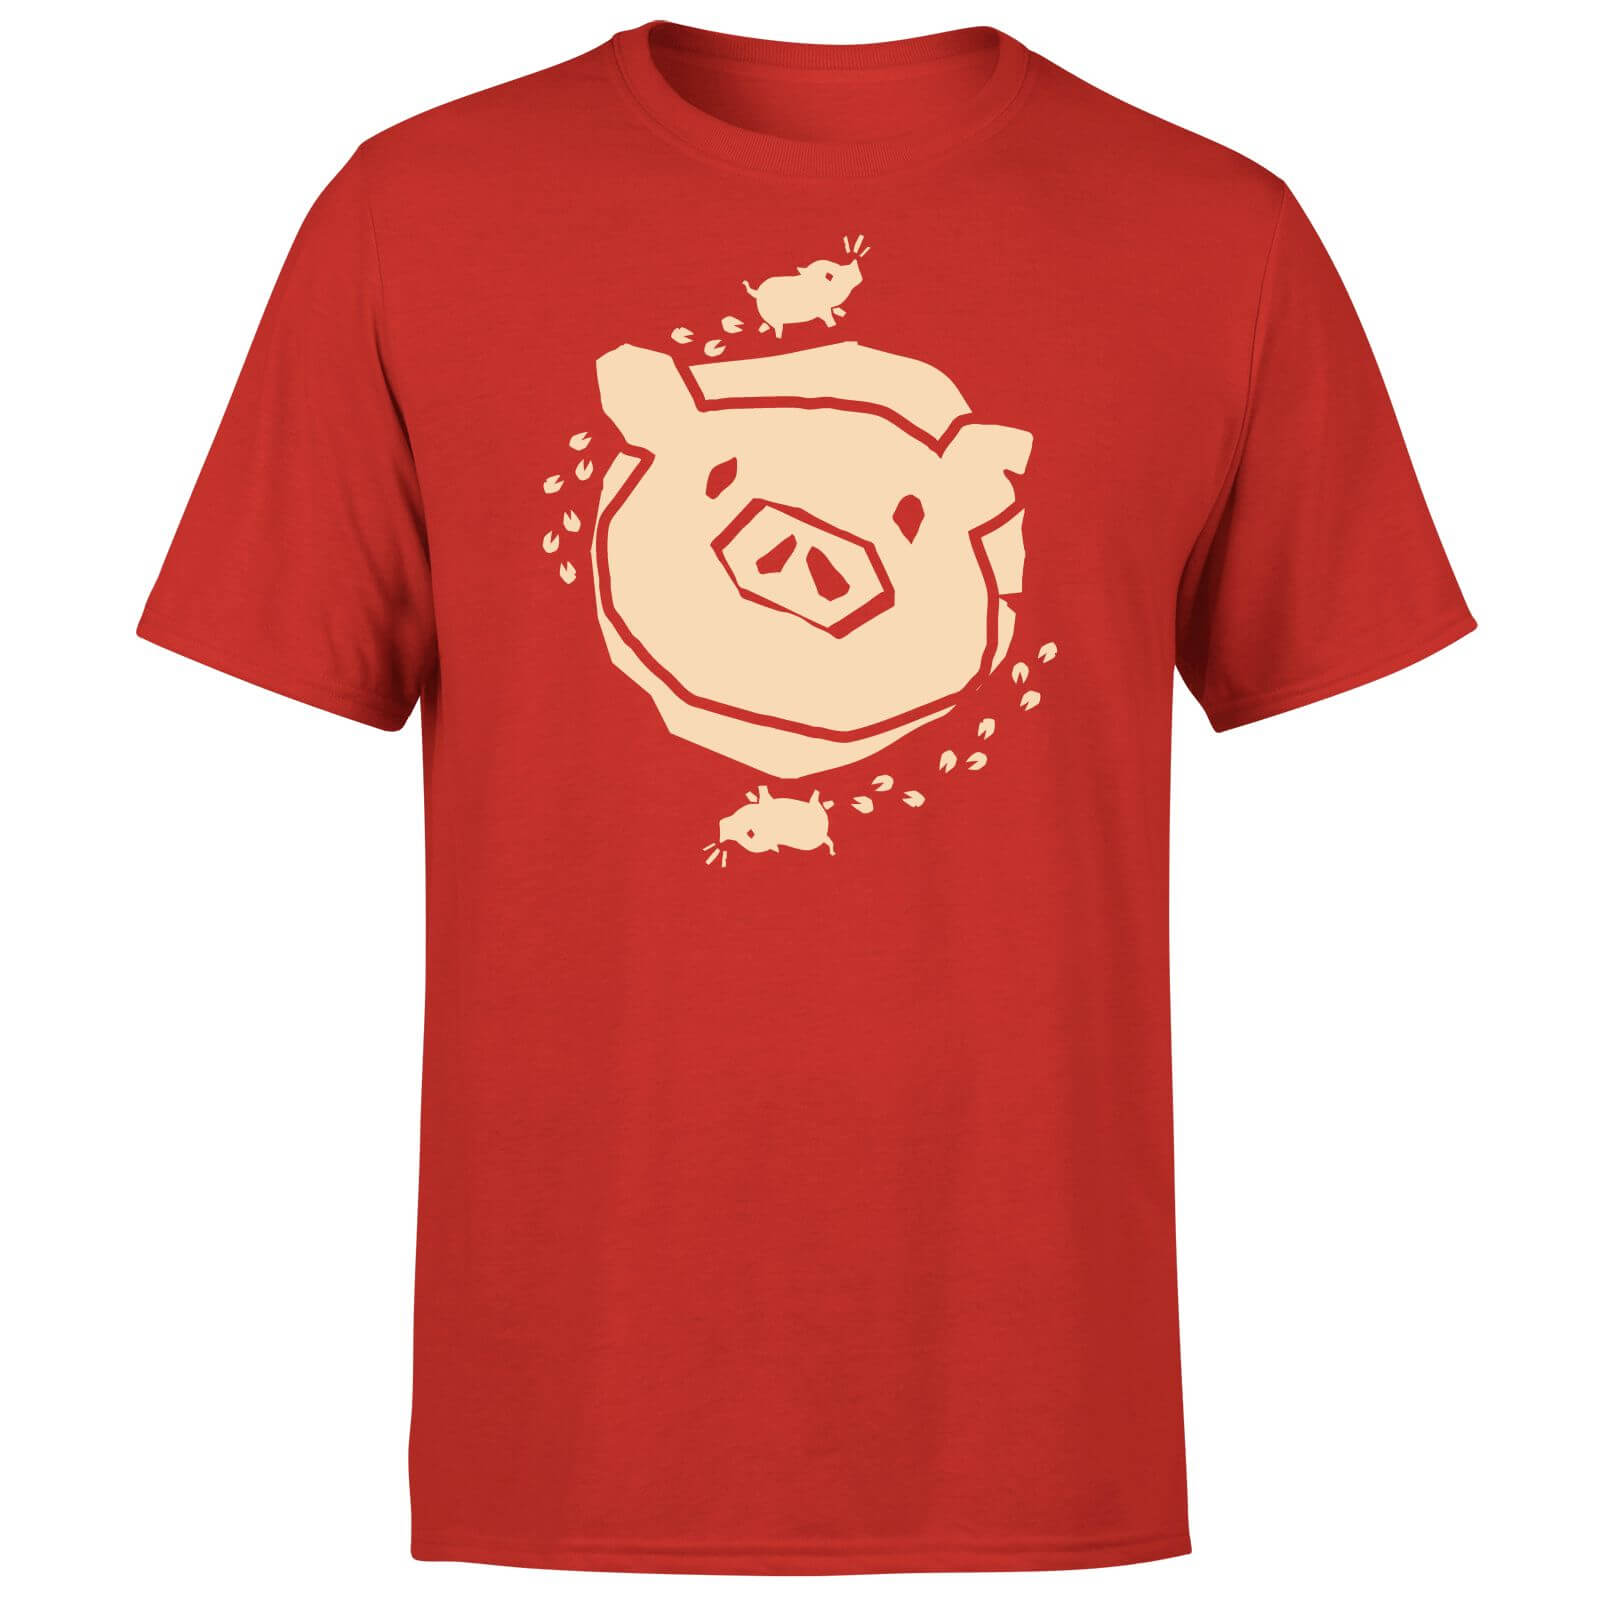 Sea of Thieves Pig T-Shirt - Red - S